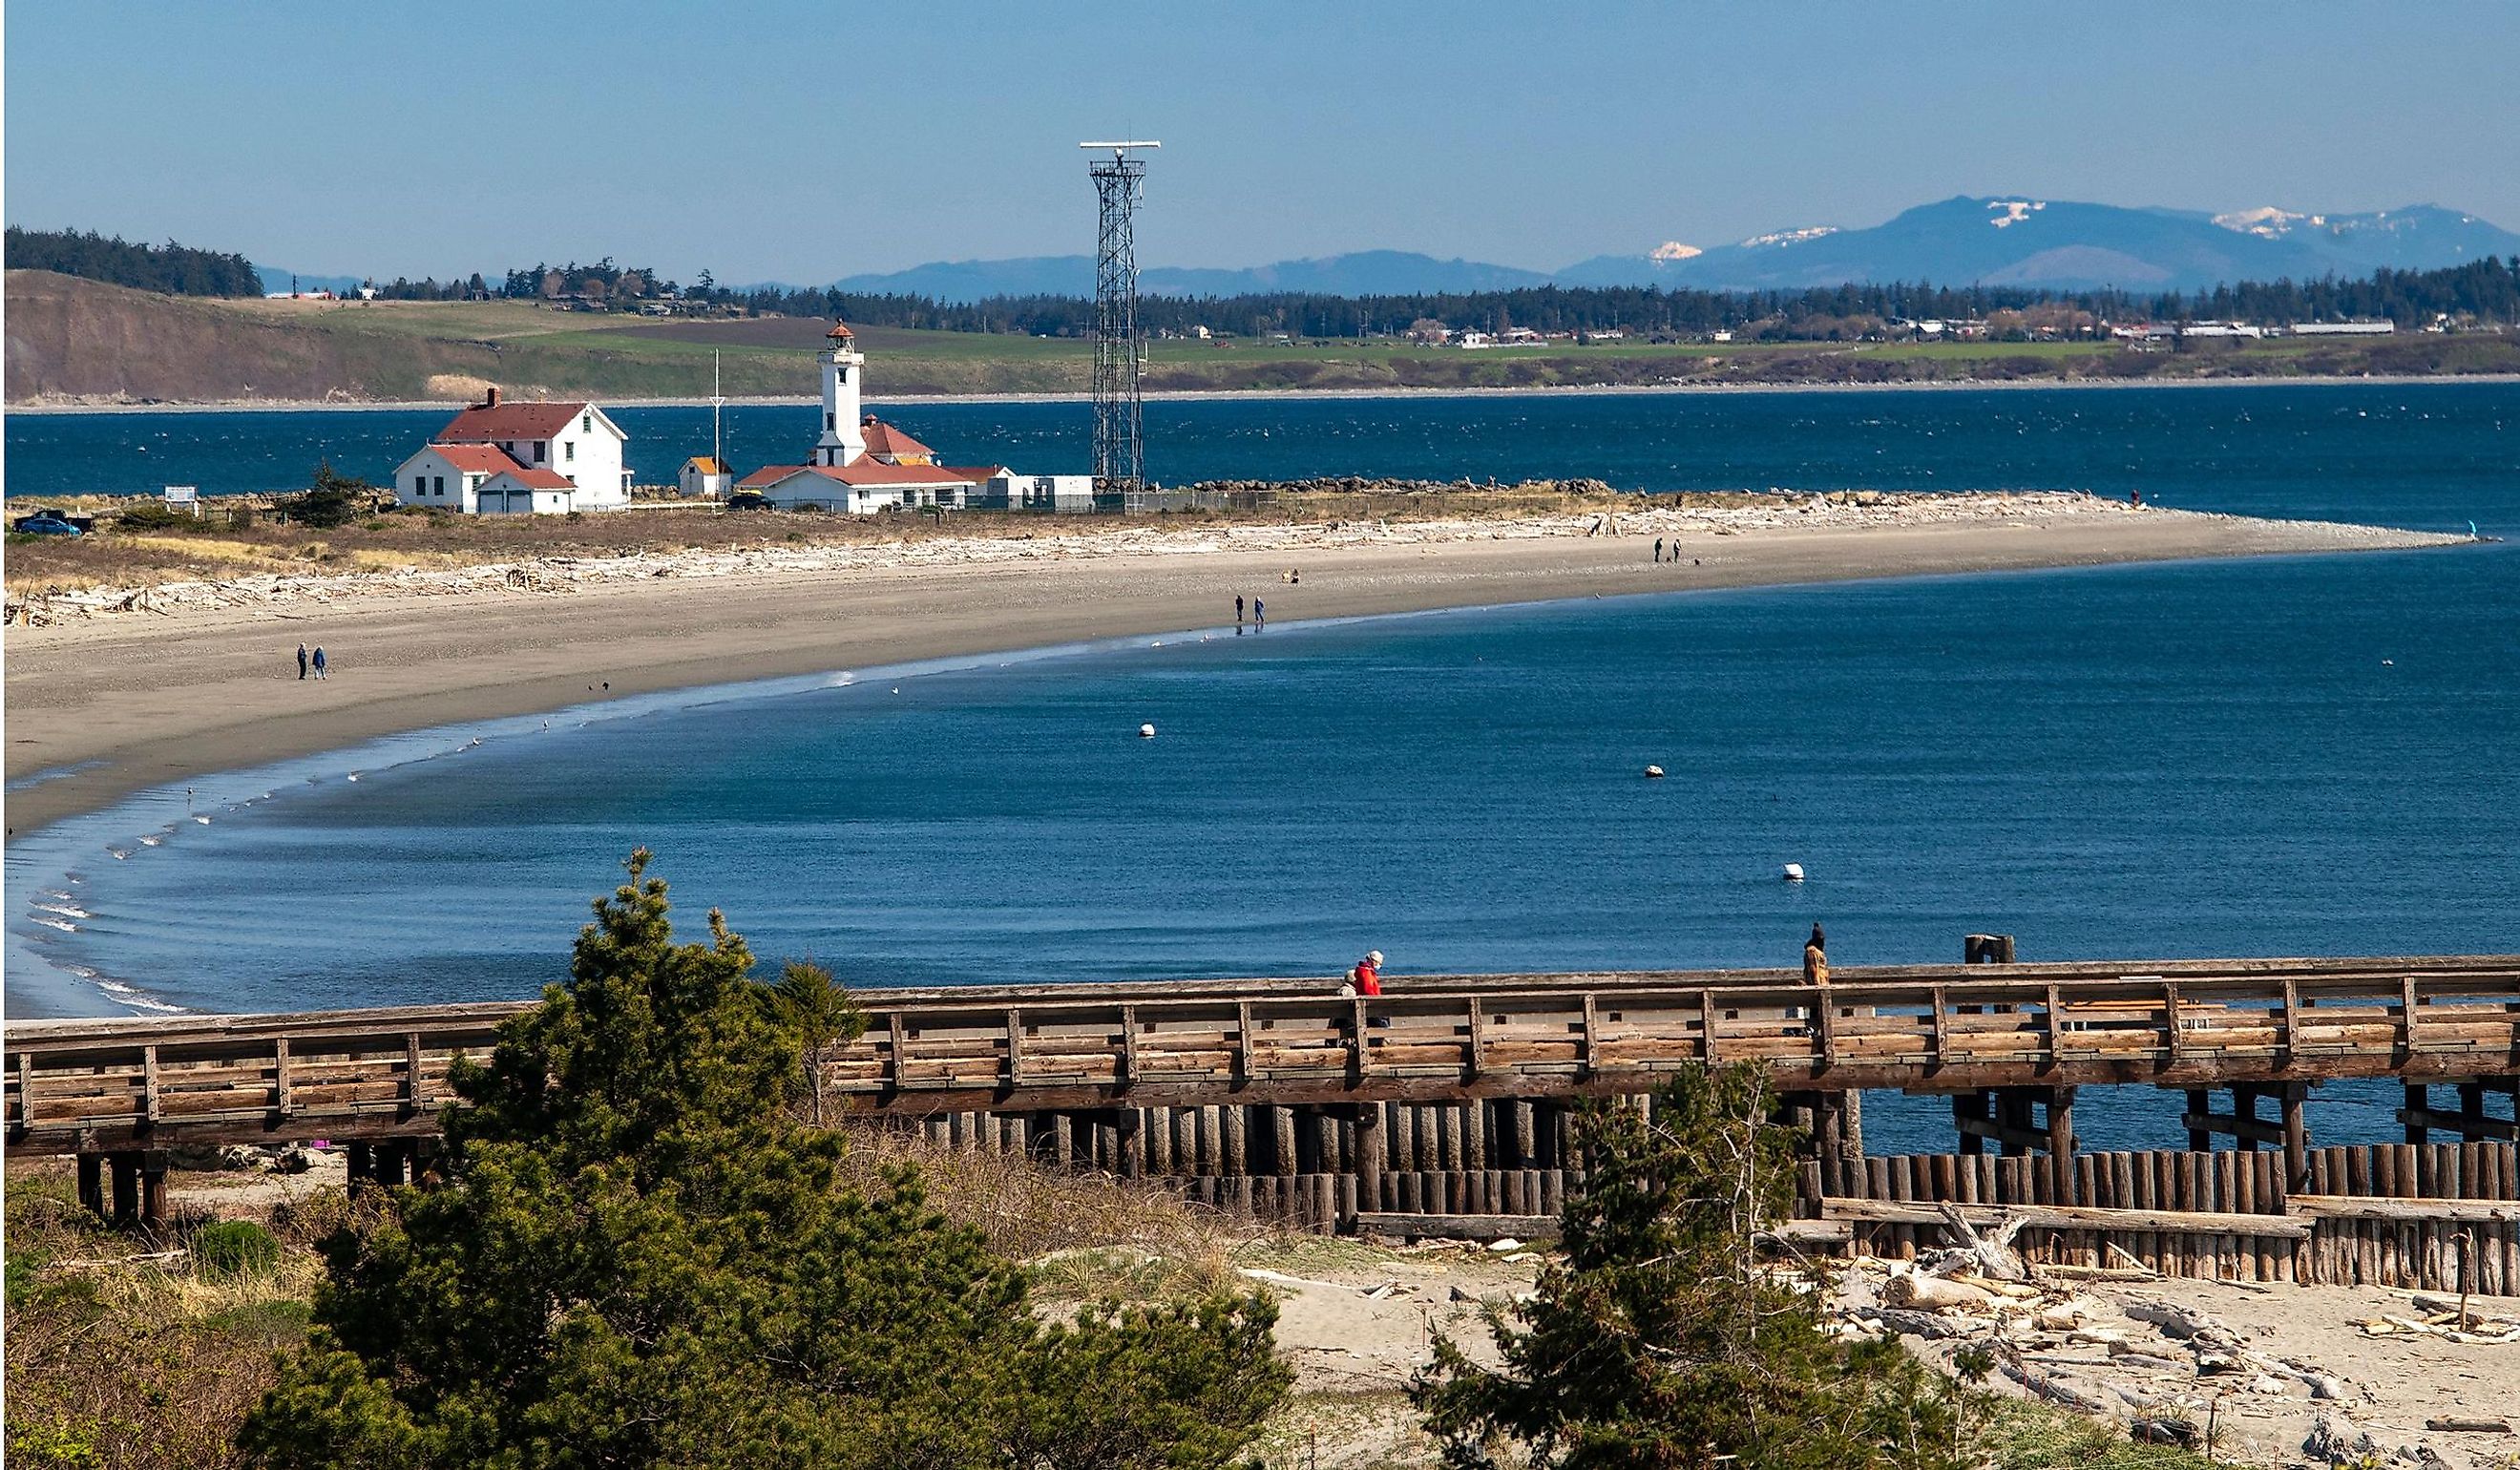 View of the harbor and lighthouse in Port Townsend, Washington